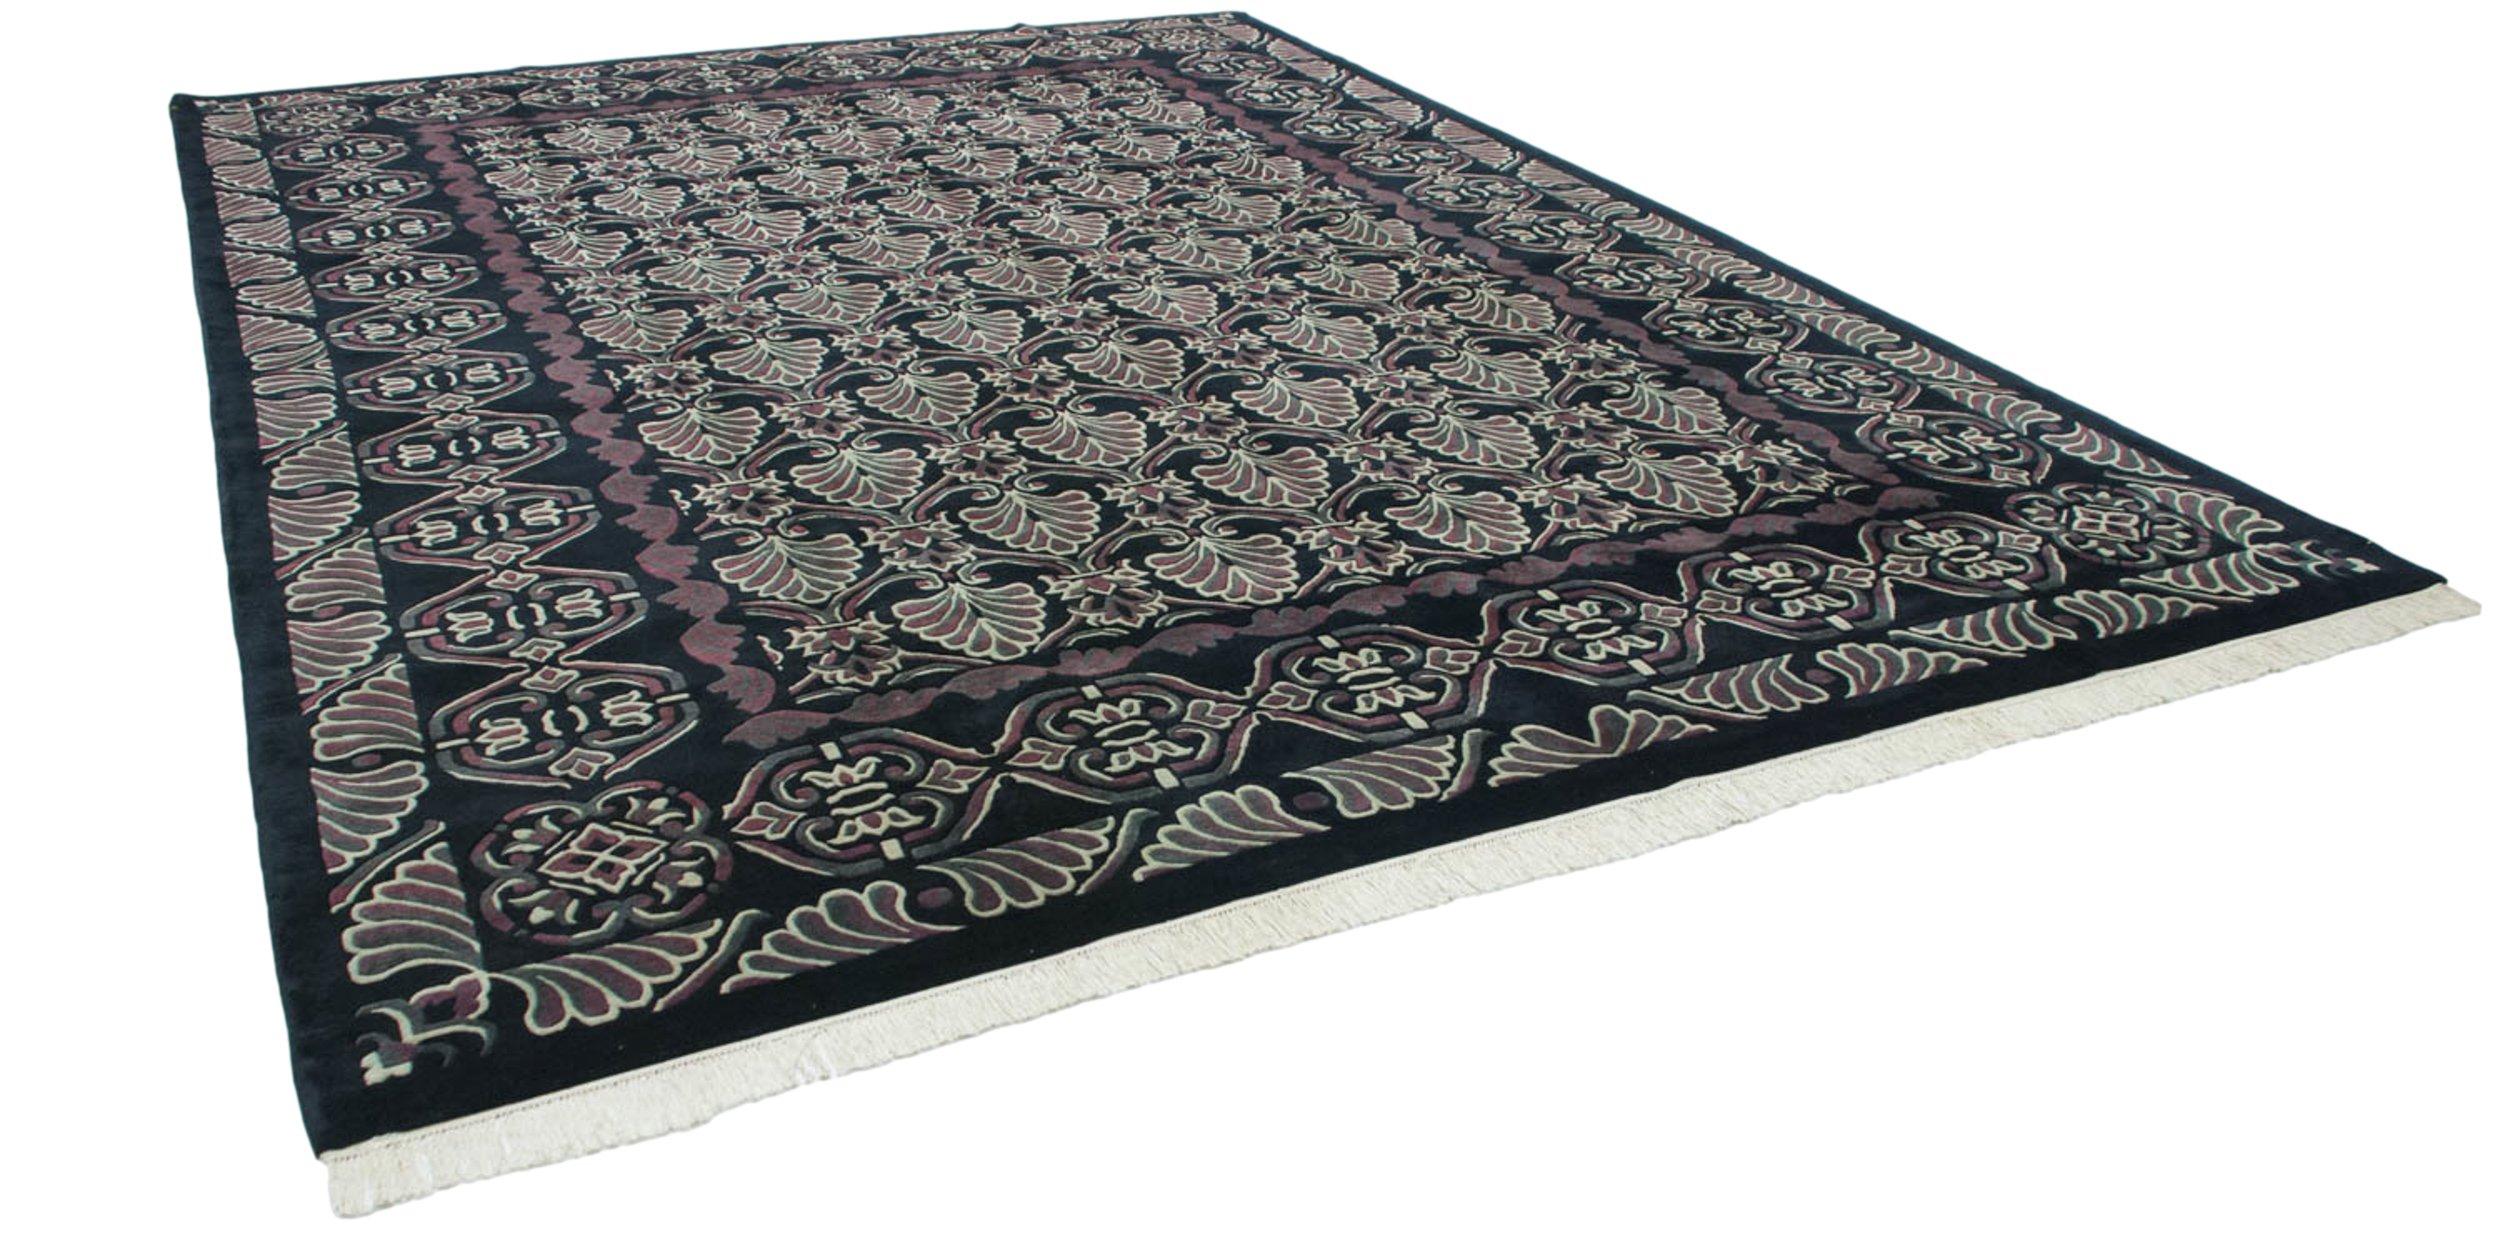 Vintage Indian Damask Design Carpet In Excellent Condition For Sale In Katonah, NY